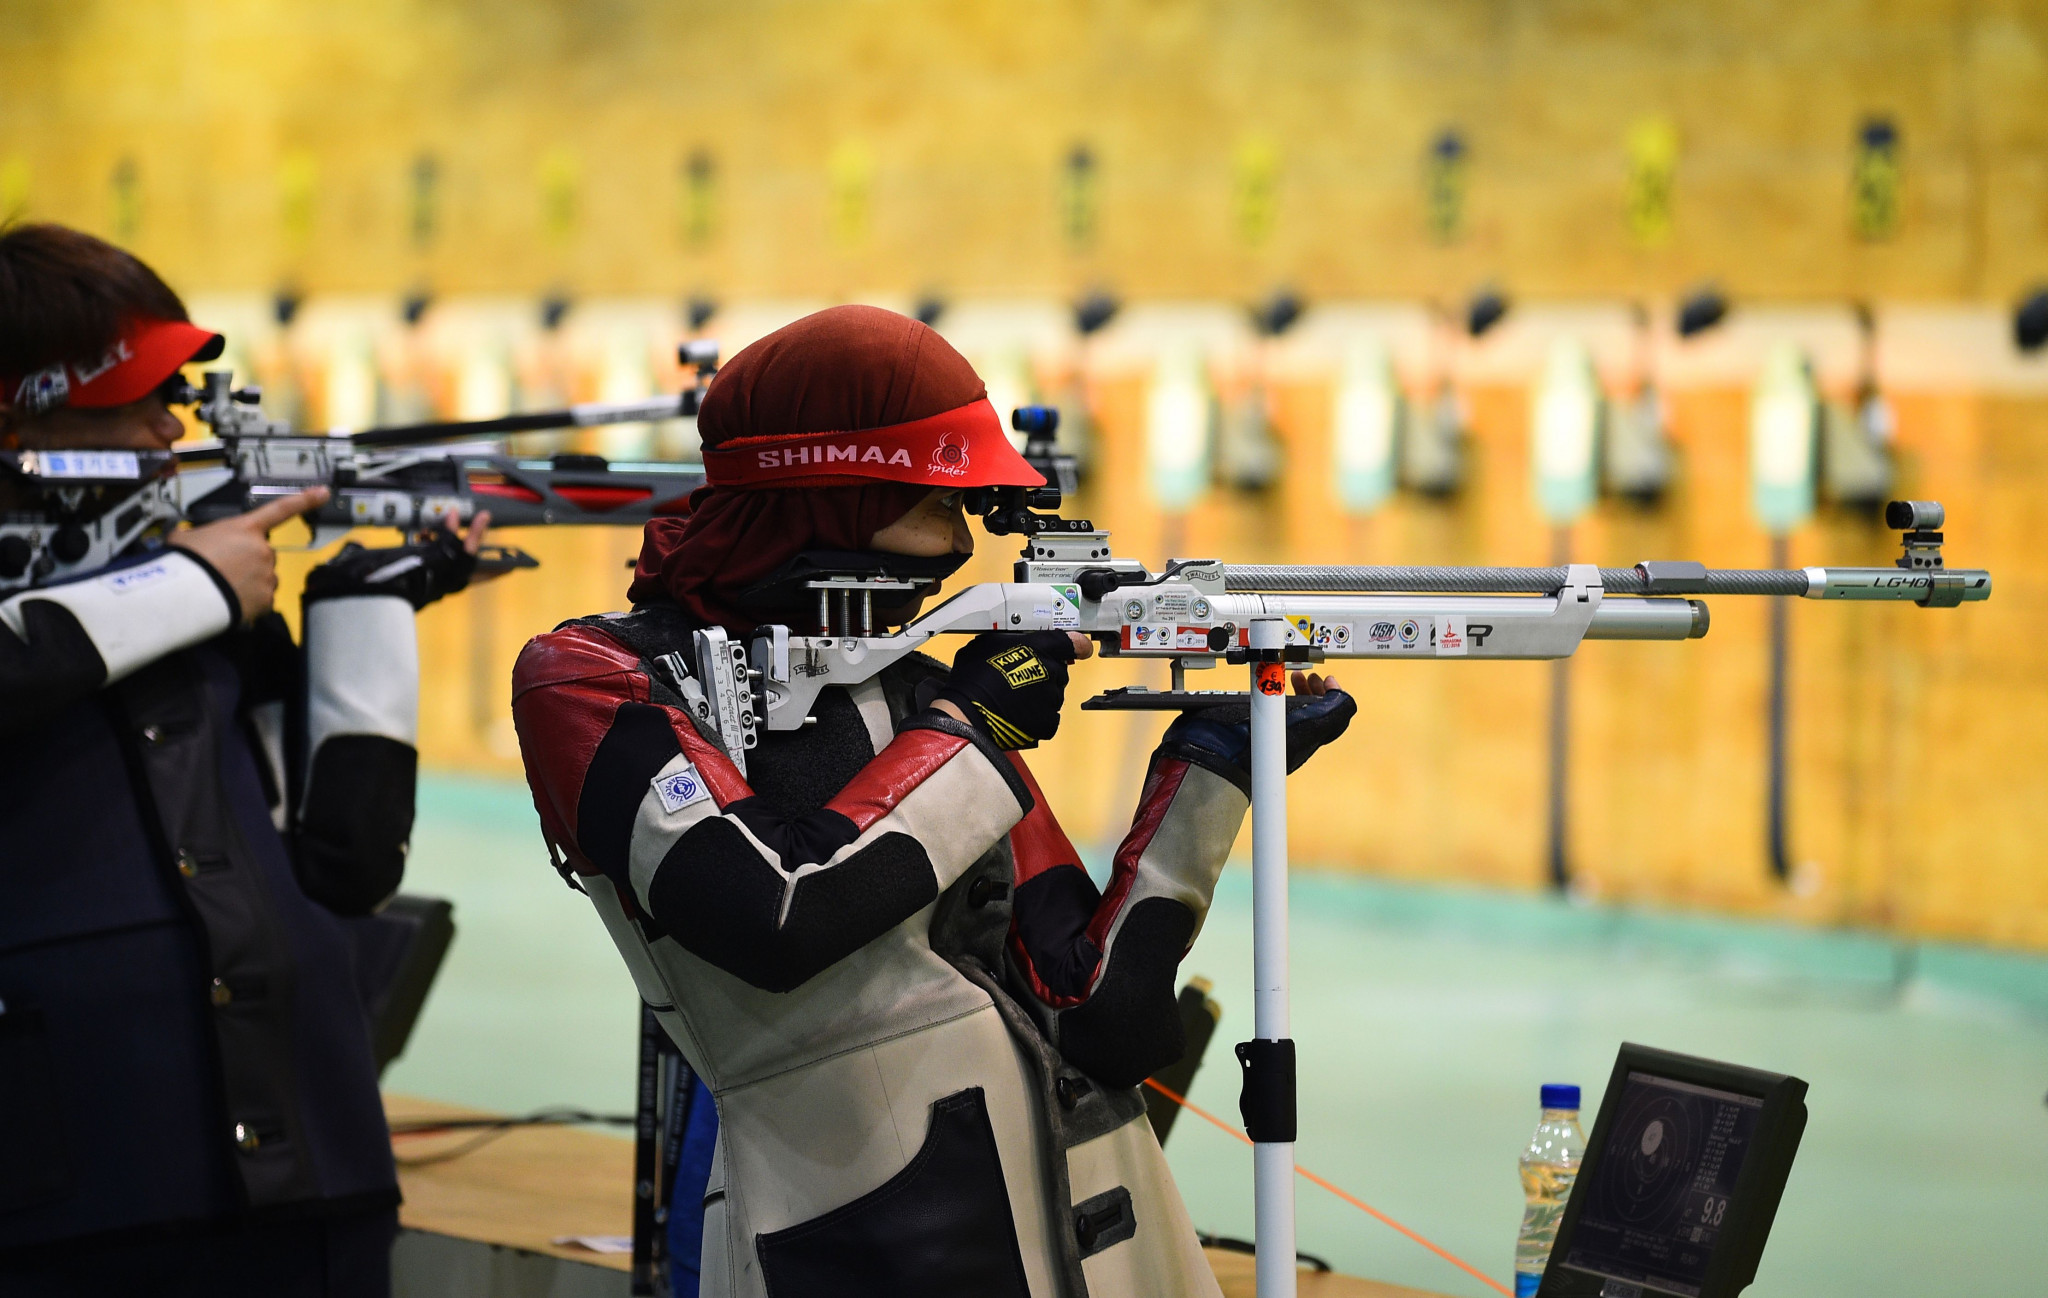 New Delhi's Dr. Karni Singh Shooting Range  is scheduled to host an ISSF World Cup next month ©Getty Images